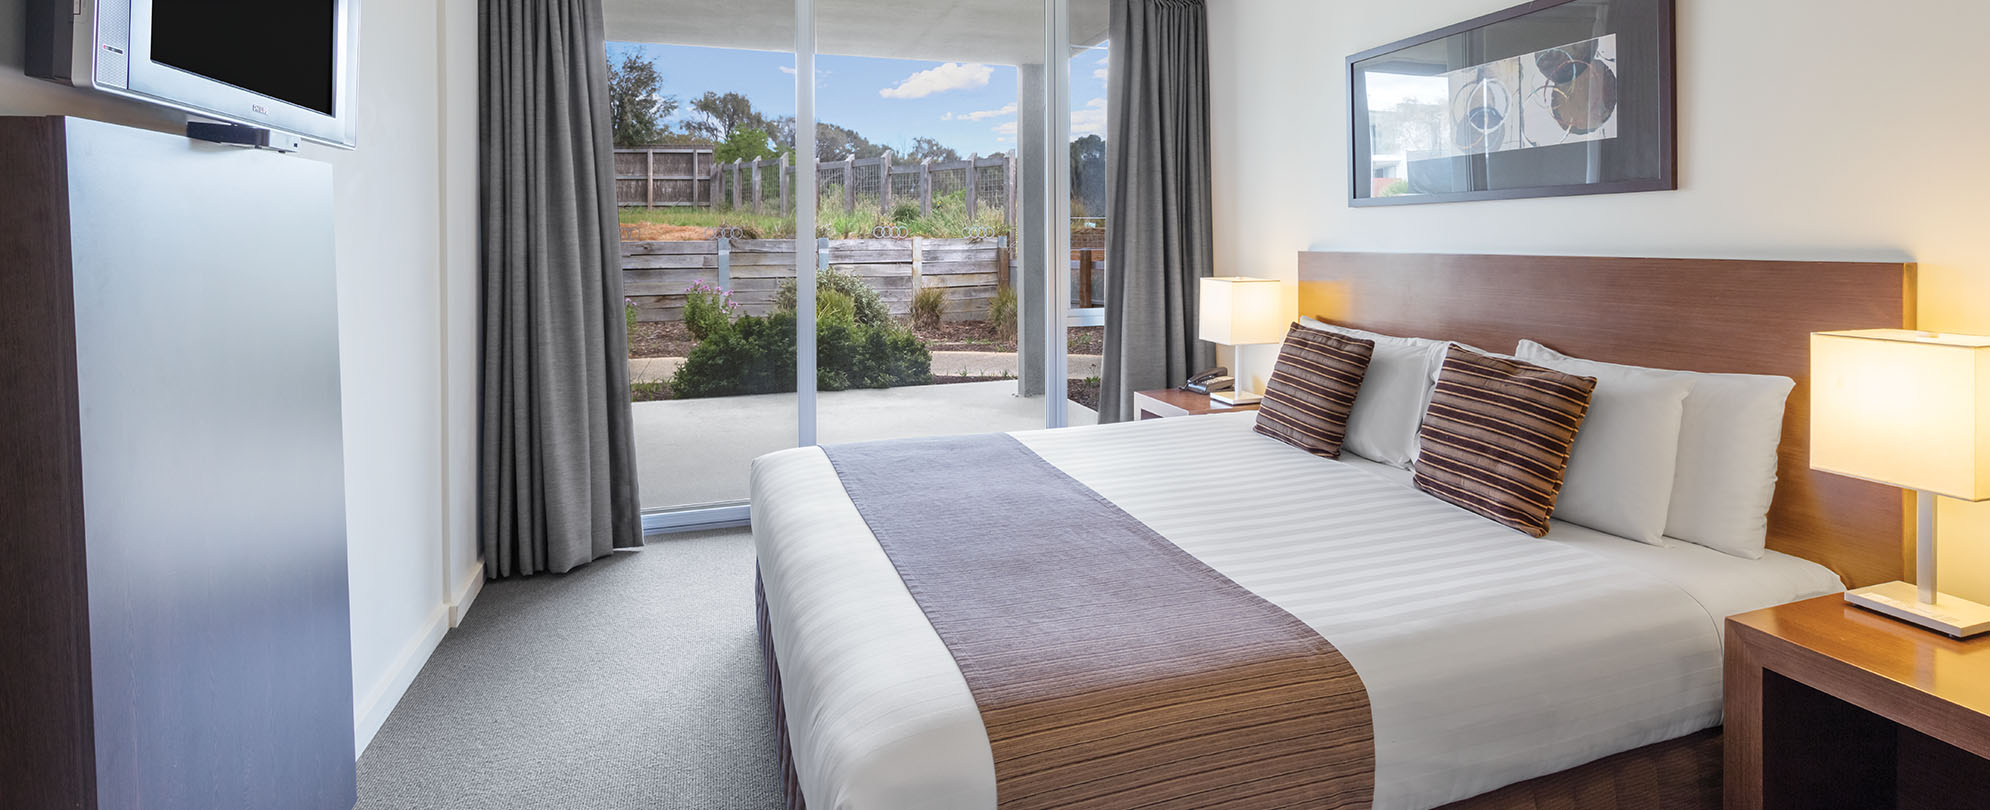 The master bedroom in a 2-bedroom suite at Club Wyndham Torquay.